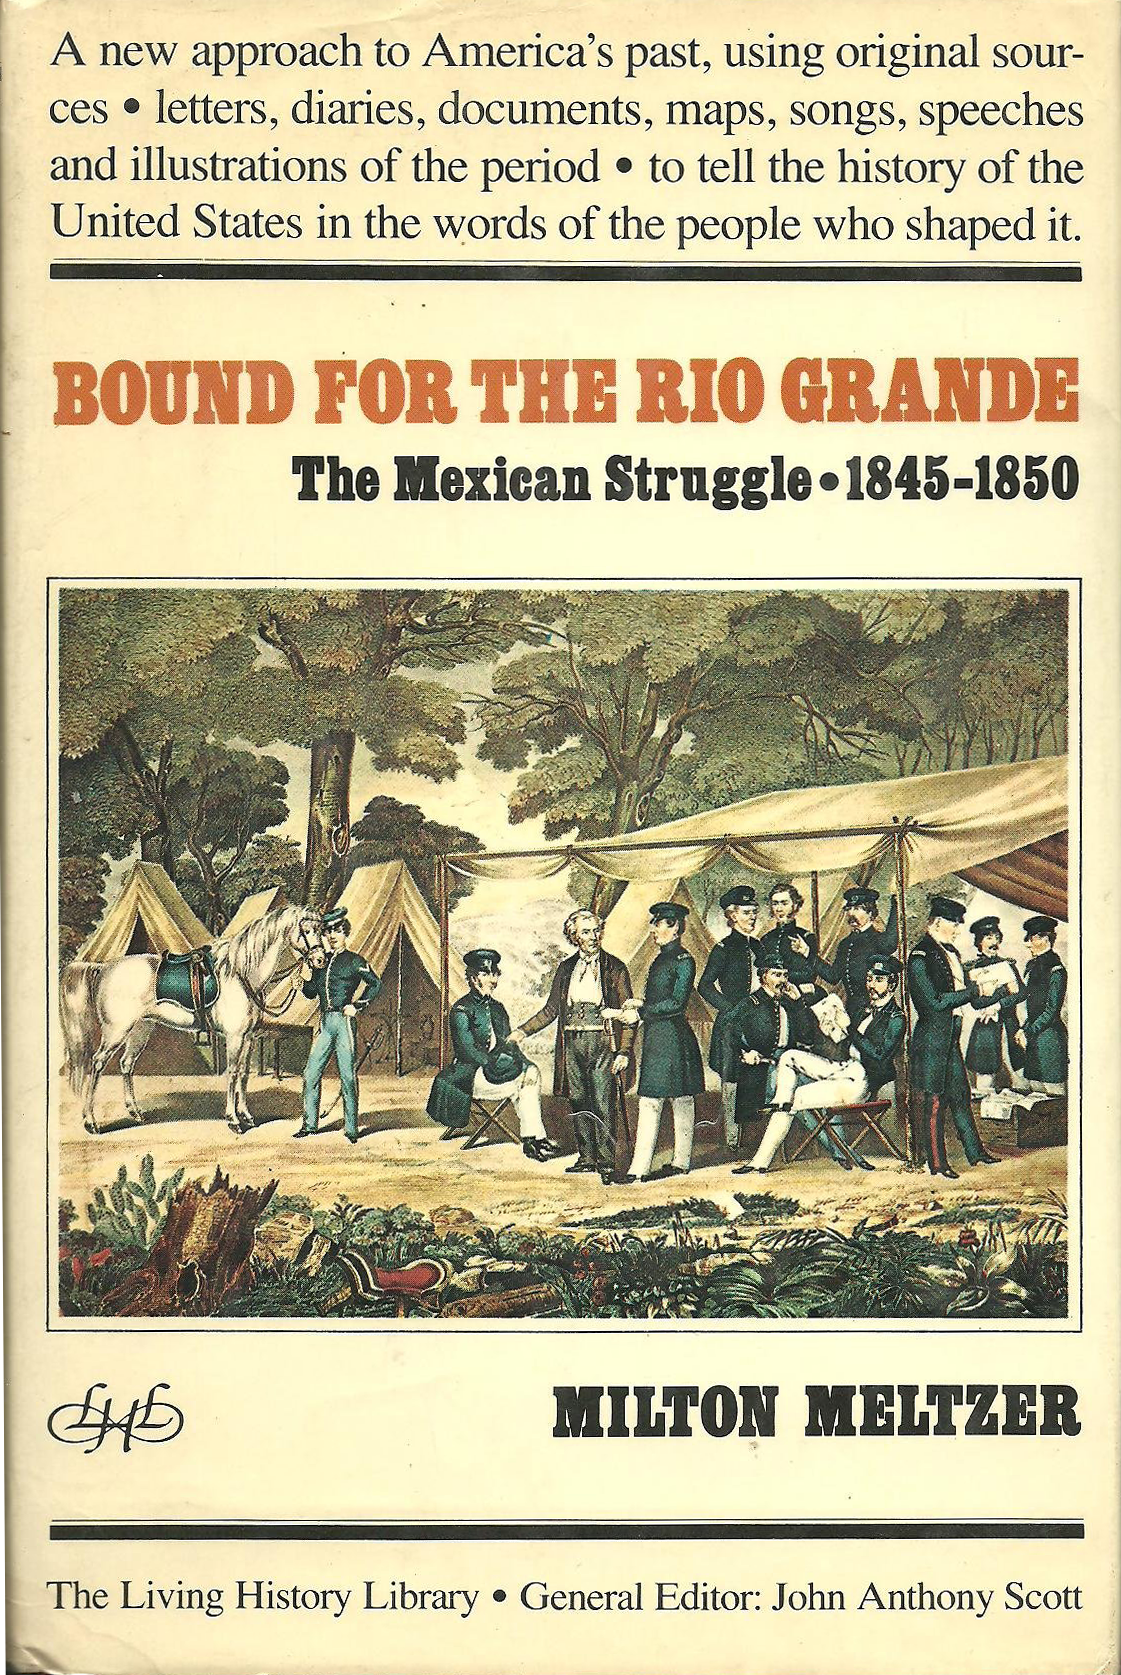 Bound for the Rio Grande | Zinn Education Project